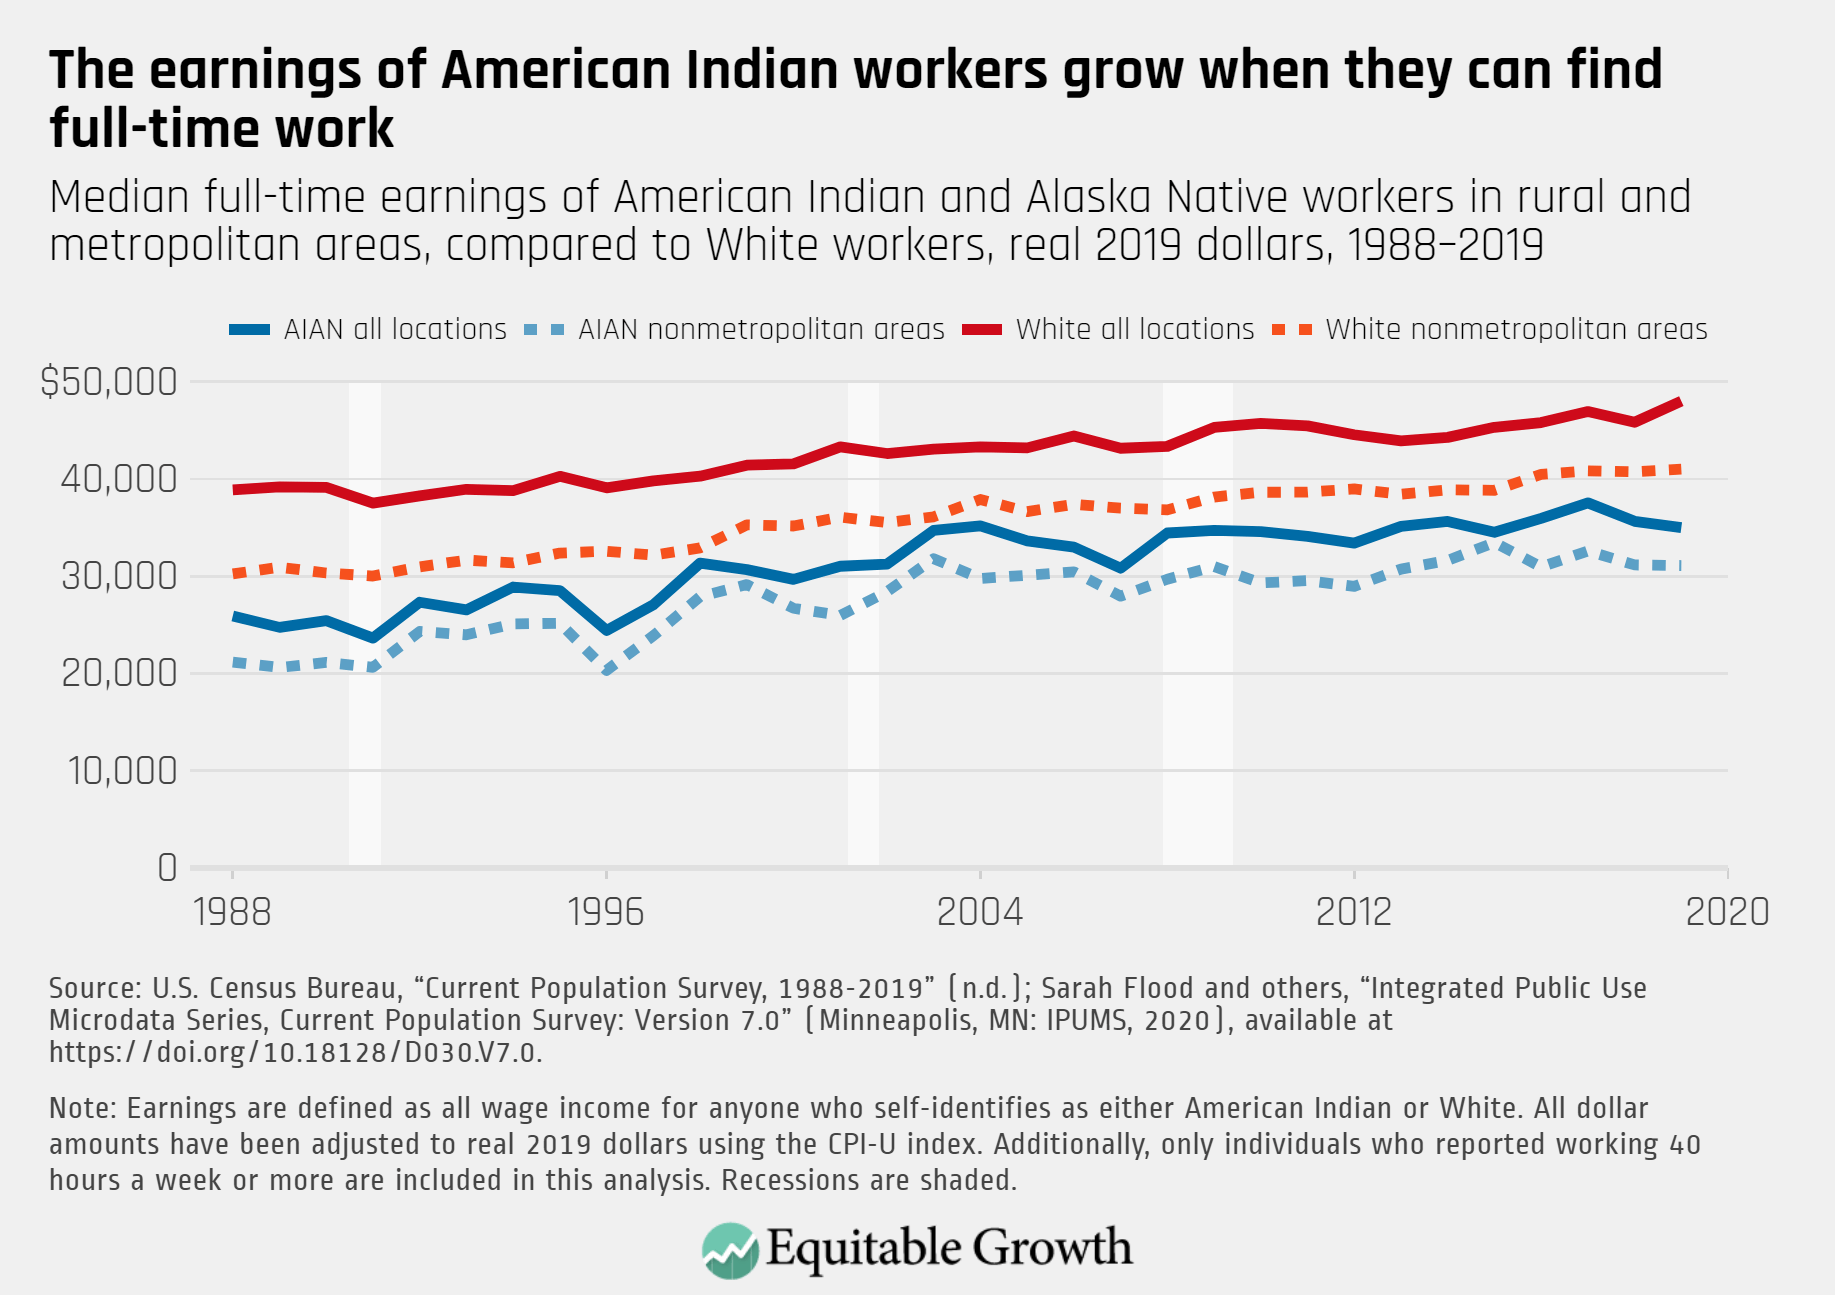 Sovereignty and improved economic outcomes for American Indians: Building  on the gains made since 1990 - Equitable Growth